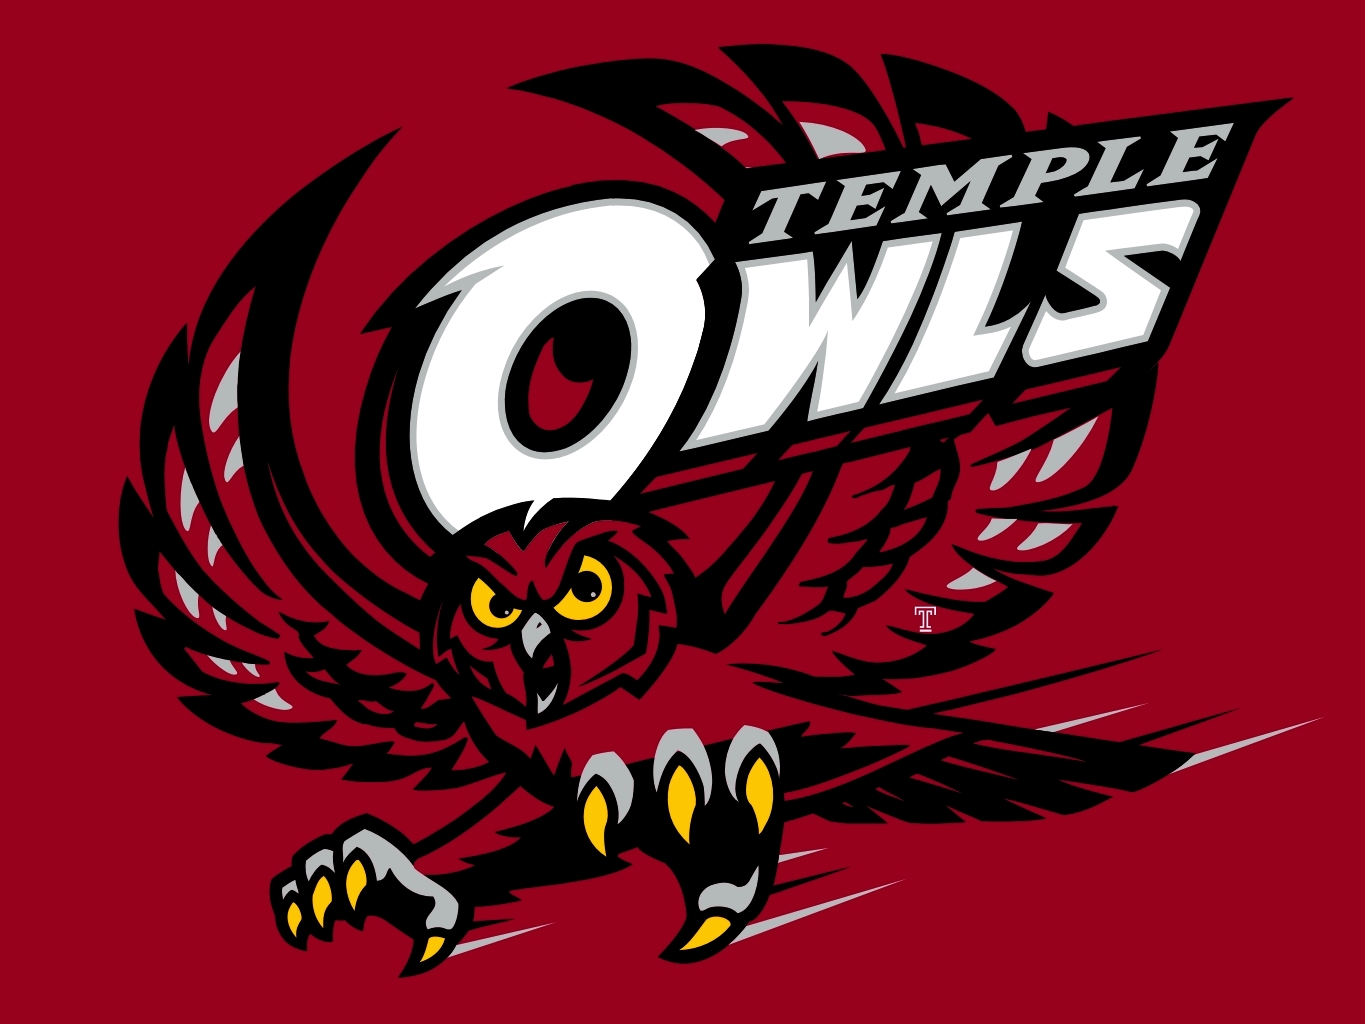 Temple Owls Tickets